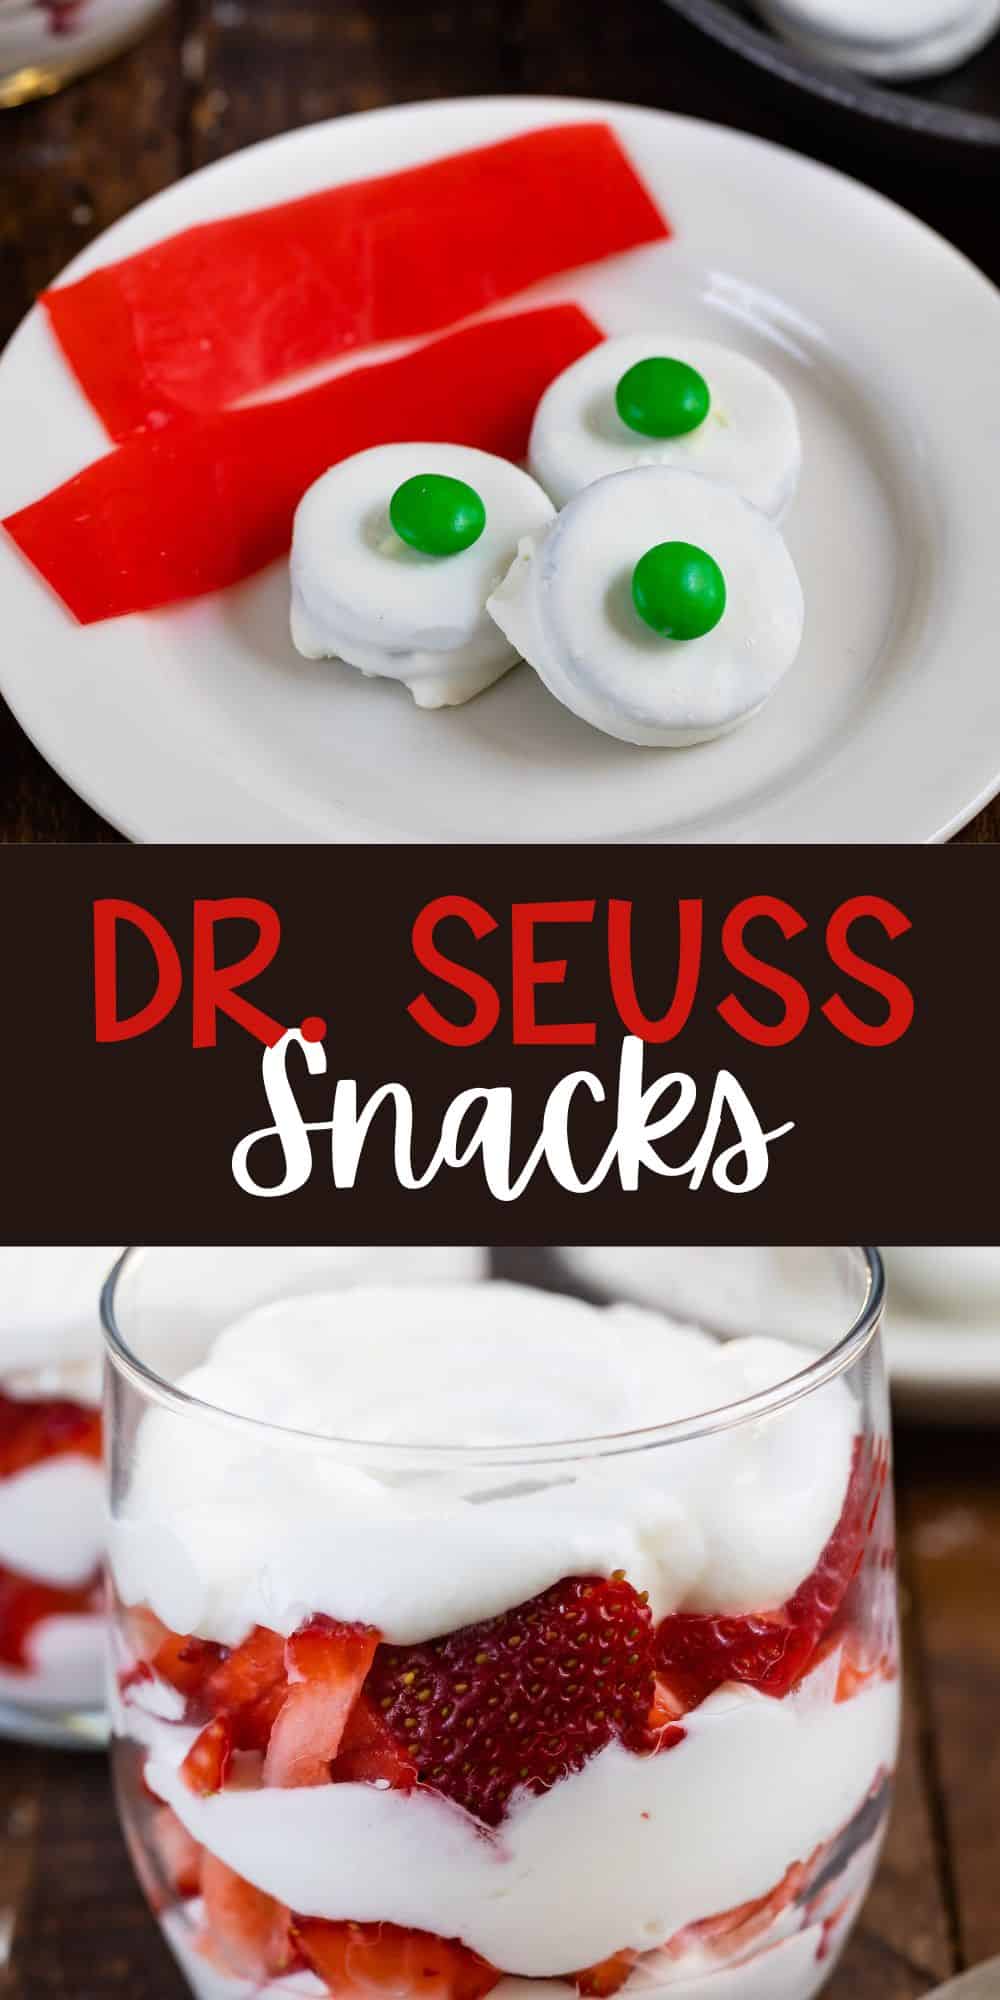 two photos showing dr Seuss snacks made out of candy and strawberries for the parfait with words on the image.